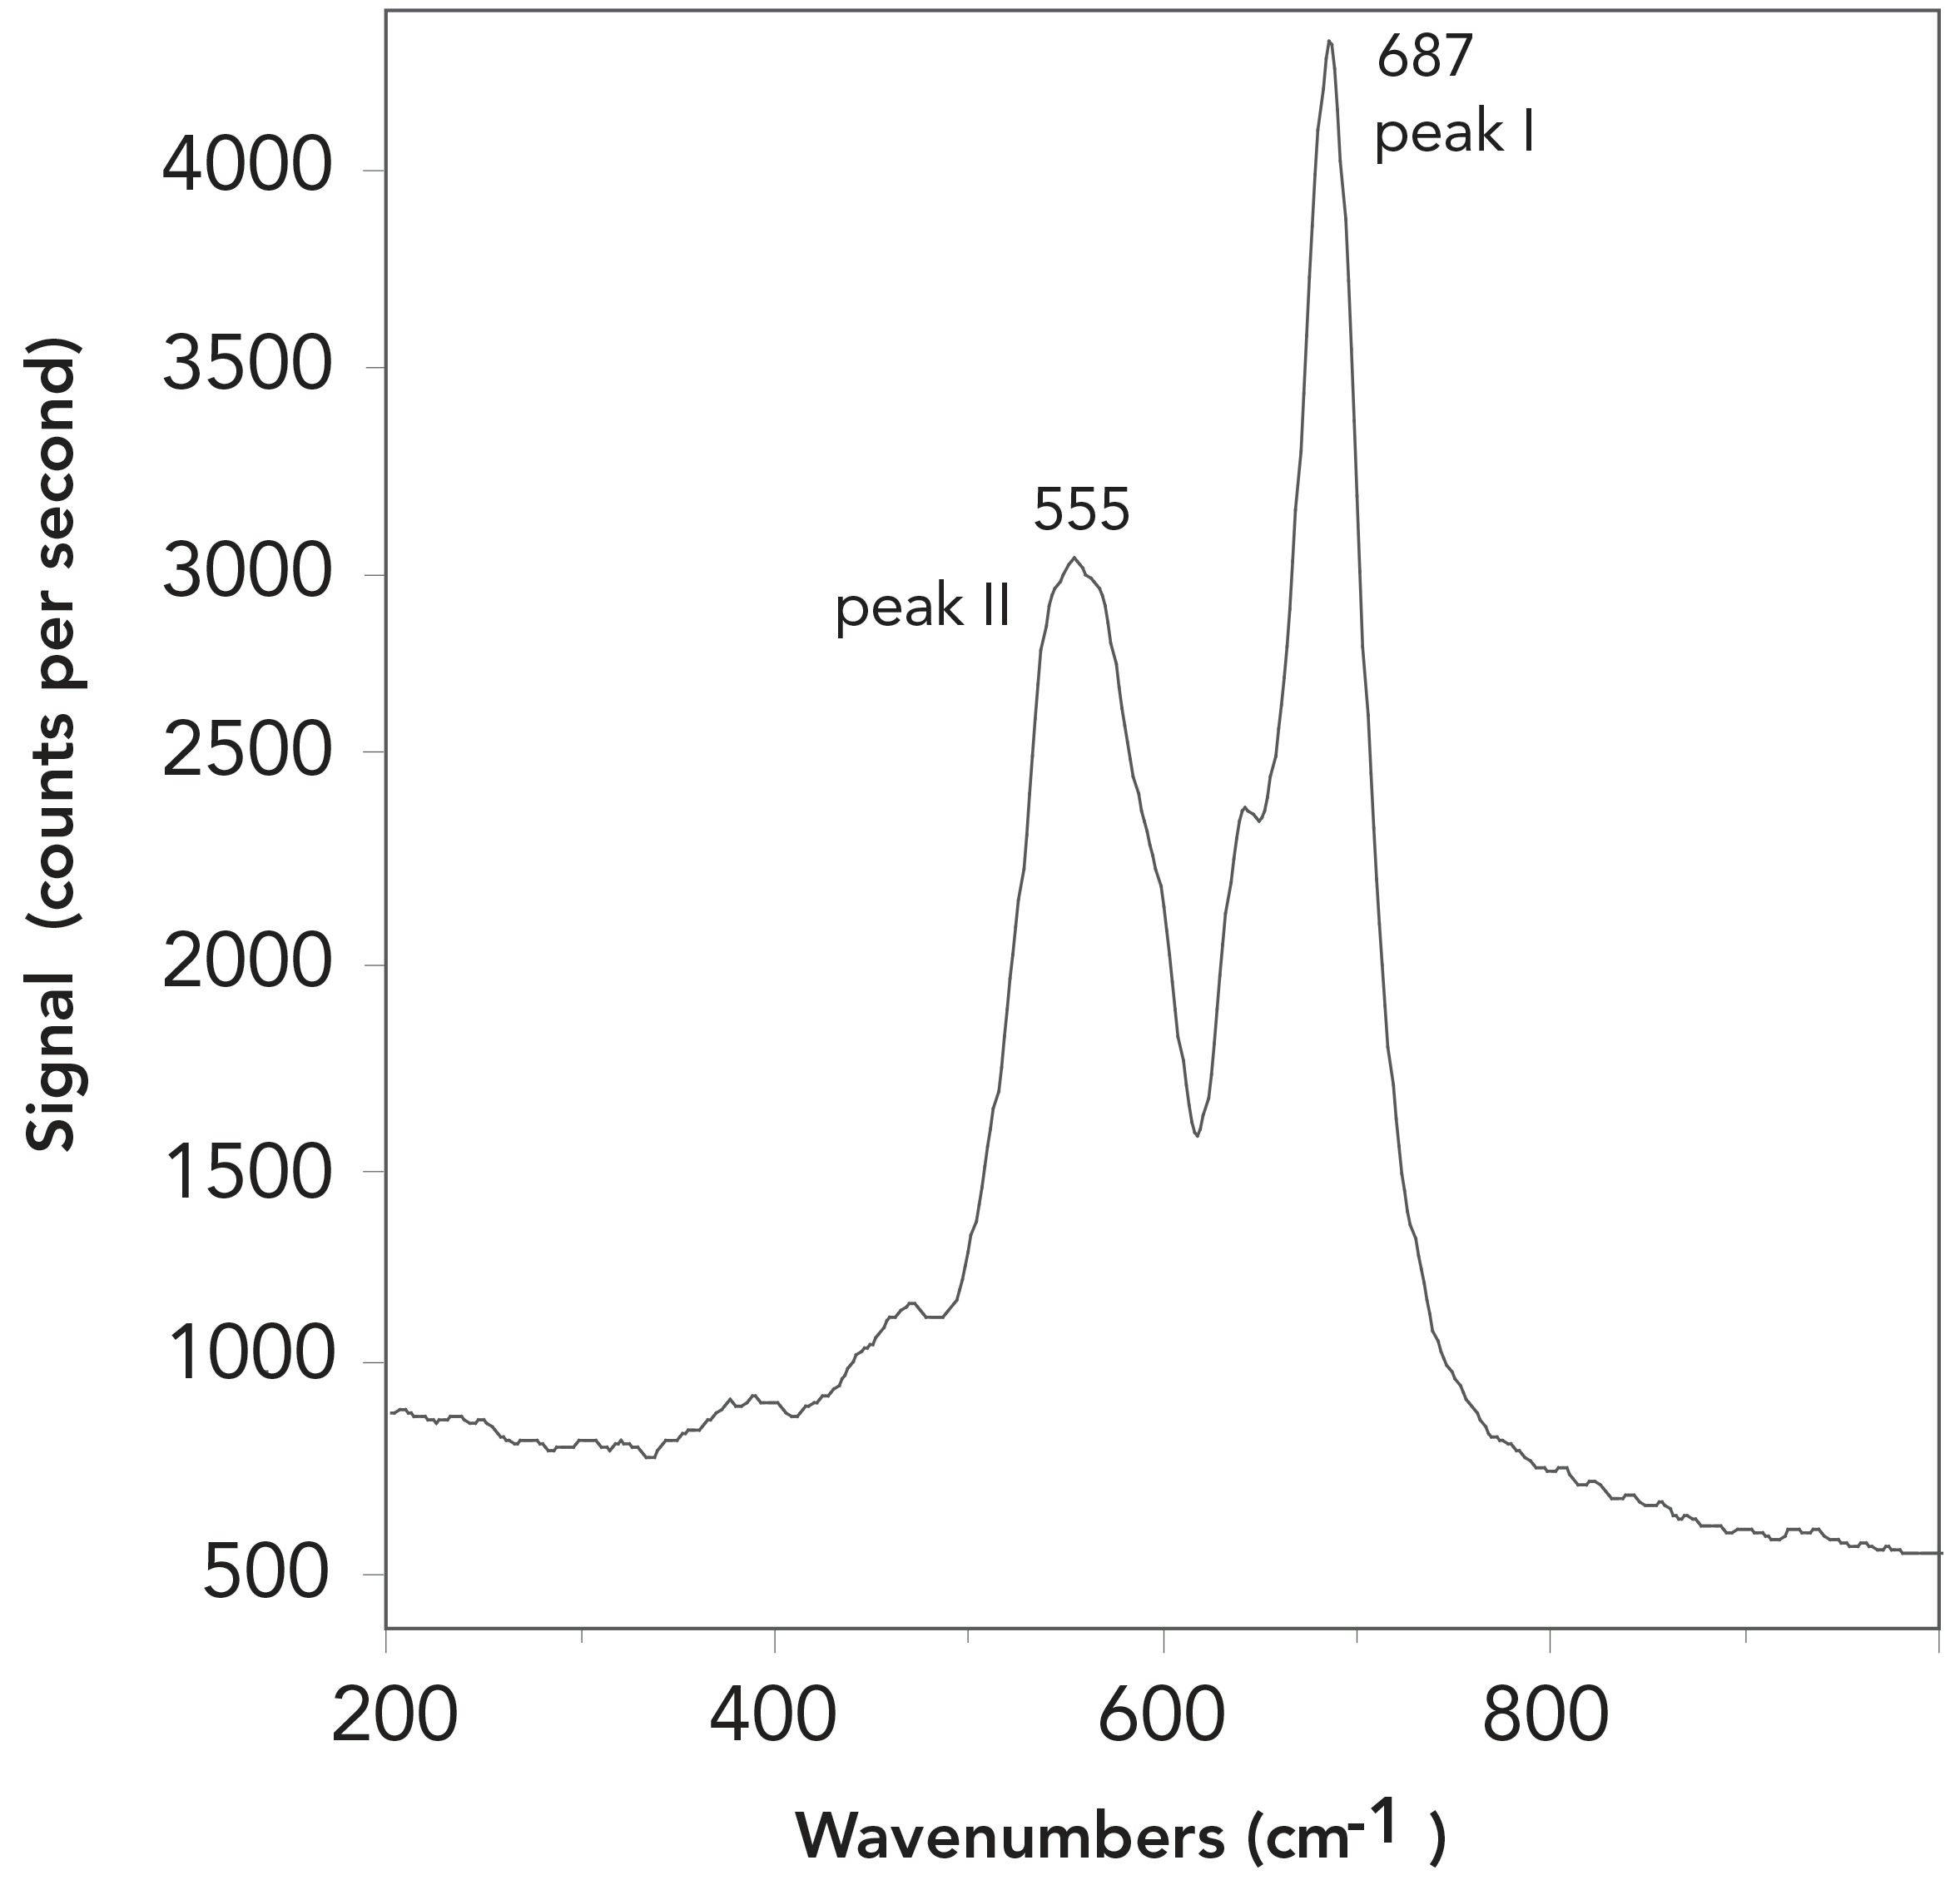 FIGURE 1: A typical Raman spectrum for chromite. It is obvious that chromite has two clear principal peaks, which are labelled as peak I (with a peak number of 687 cm-1) and peak II (with a peak number of 555 cm-1). Both peaks have an error of less than ±1 cm-1. Peak I displays a small peak at the left shoulder to which less attention is focused; it was shown not to be important for our results.